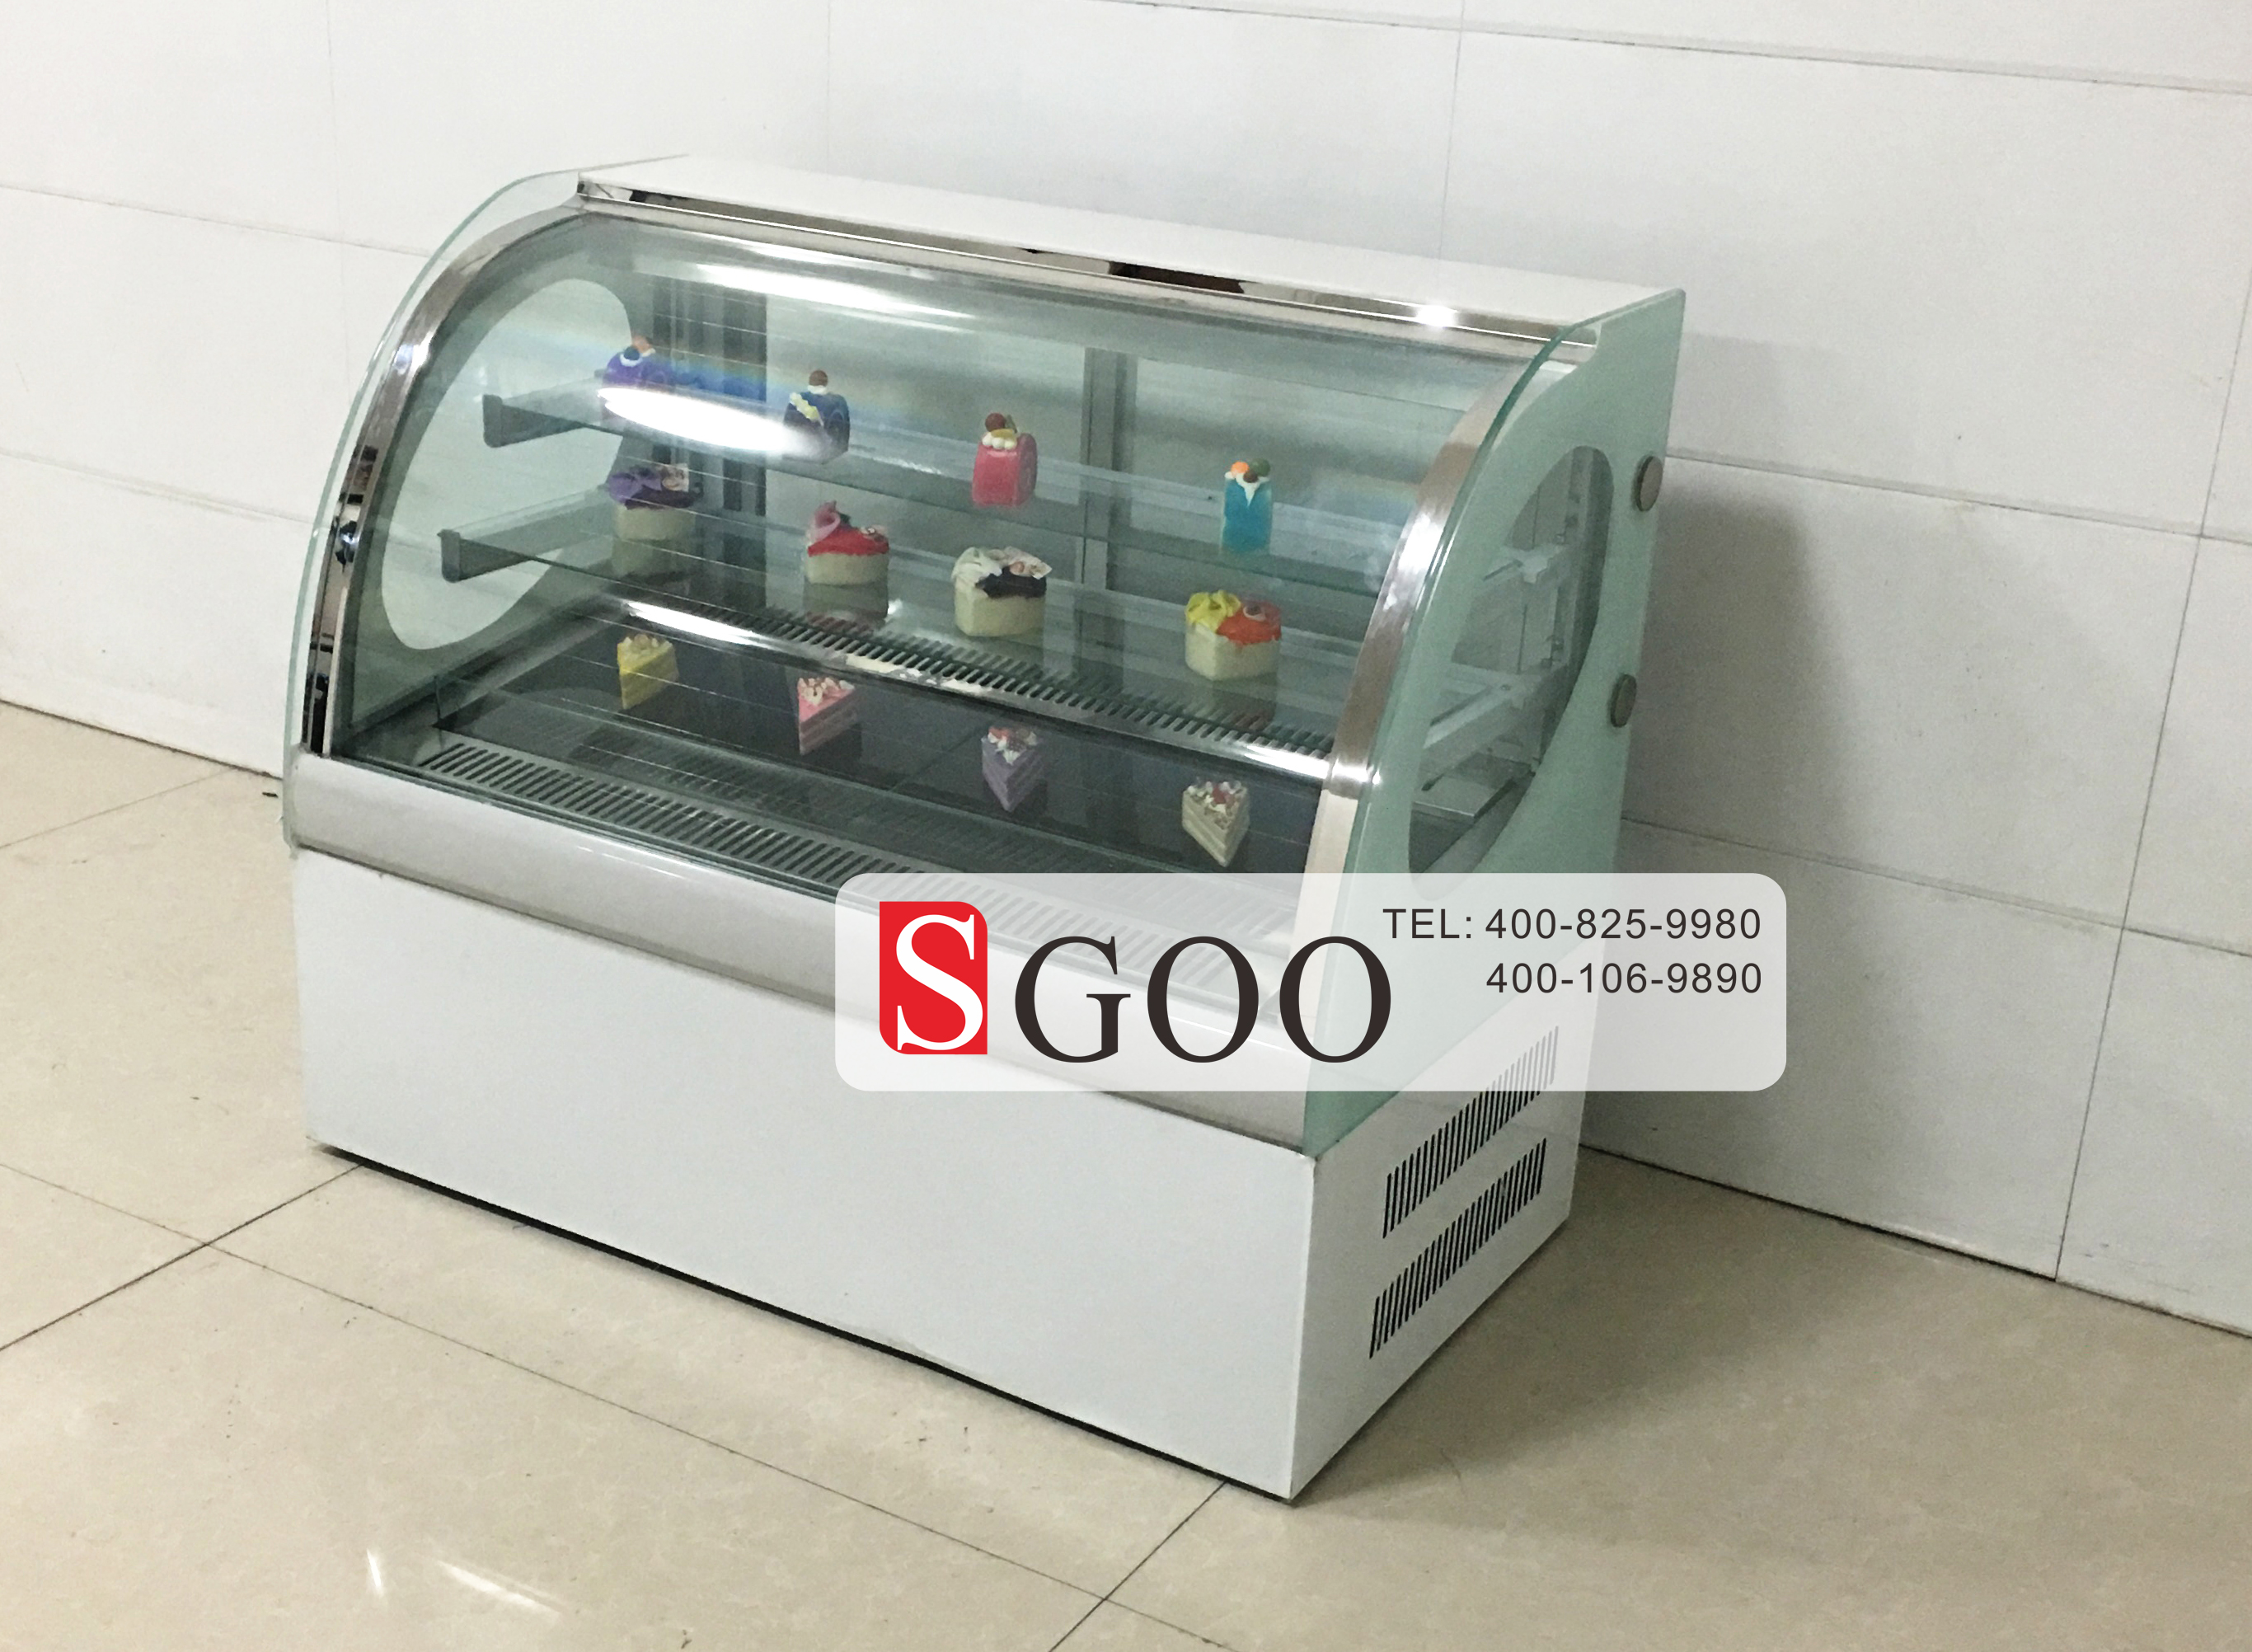 The quality of the supermarket display cooler determines the walk-in cooler price 